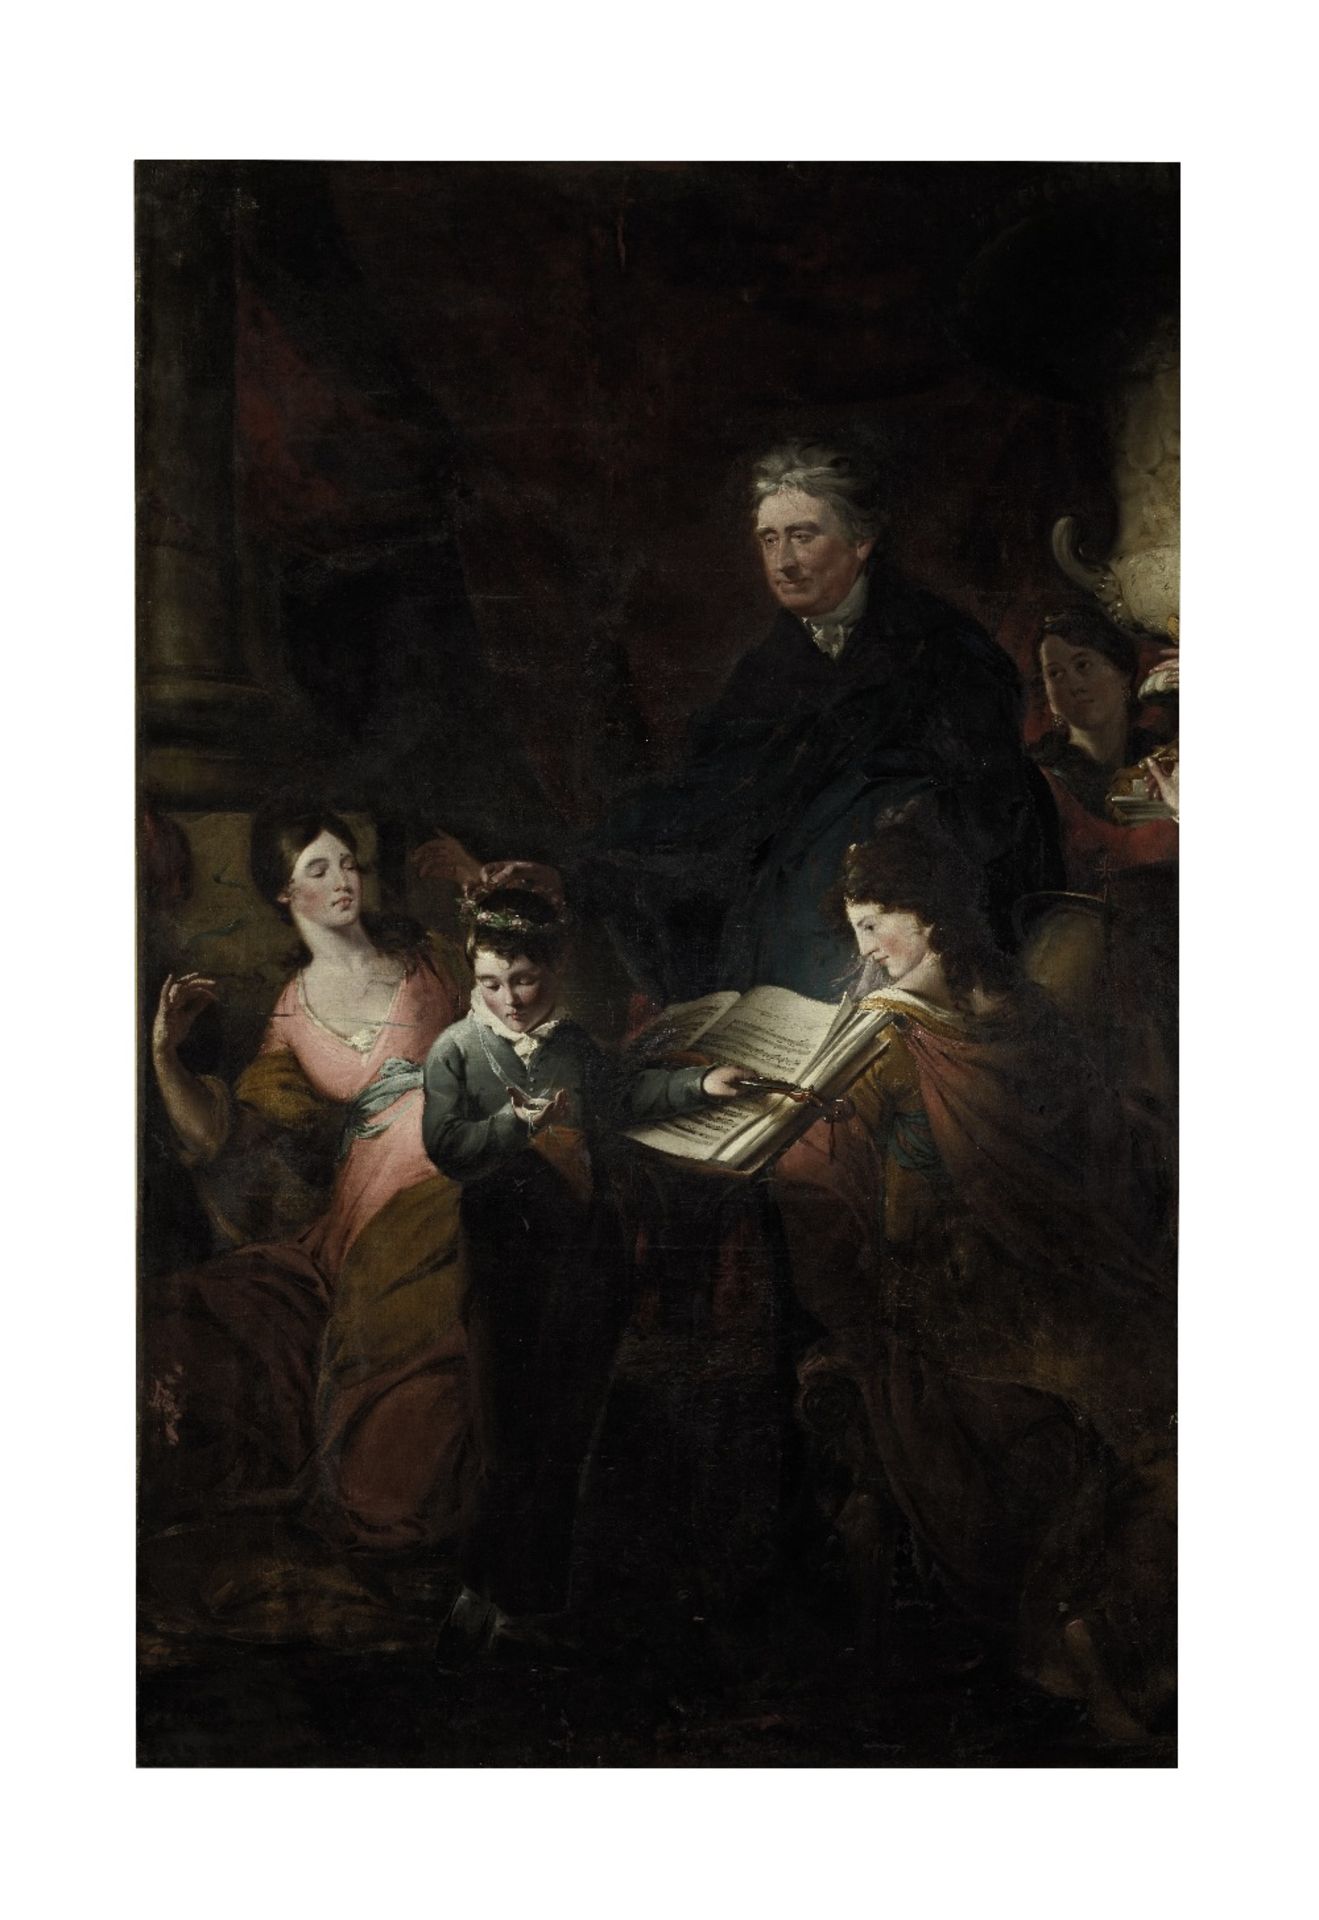 Attributed to William Home Lizars (British, 1788-1859) The Earl of Buchan at the orchestra, Corr...